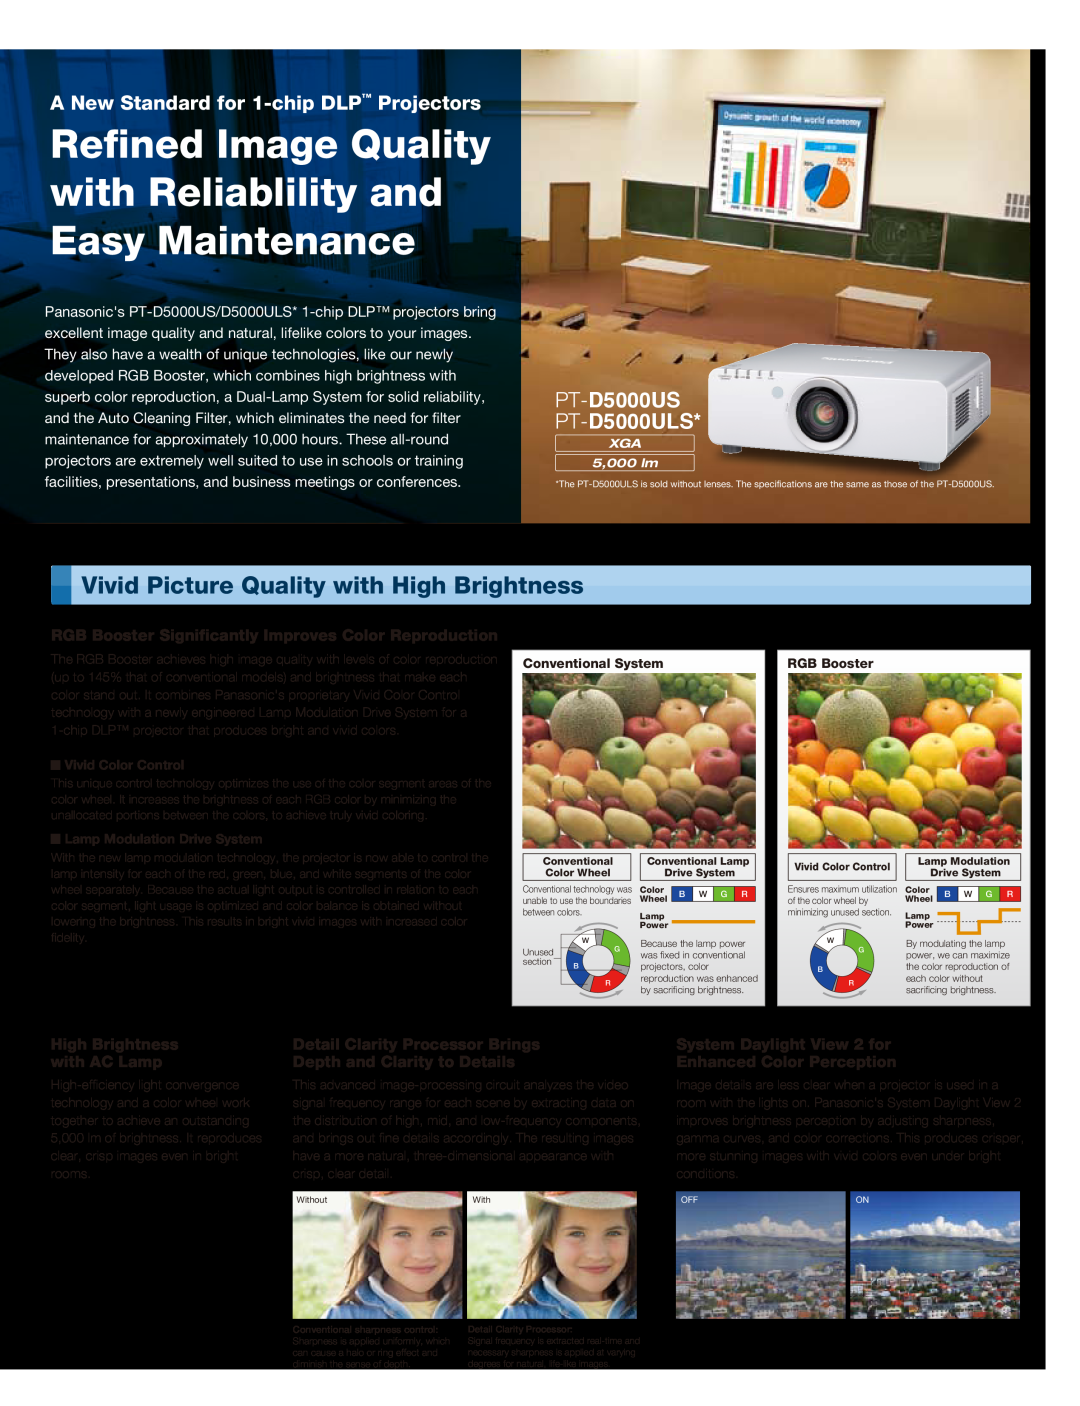 Panasonic Vivid Picture Quality with High Brightness, PT-D5000US PT-D5000ULS, A New Standard for 1-chip DLP Projectors 